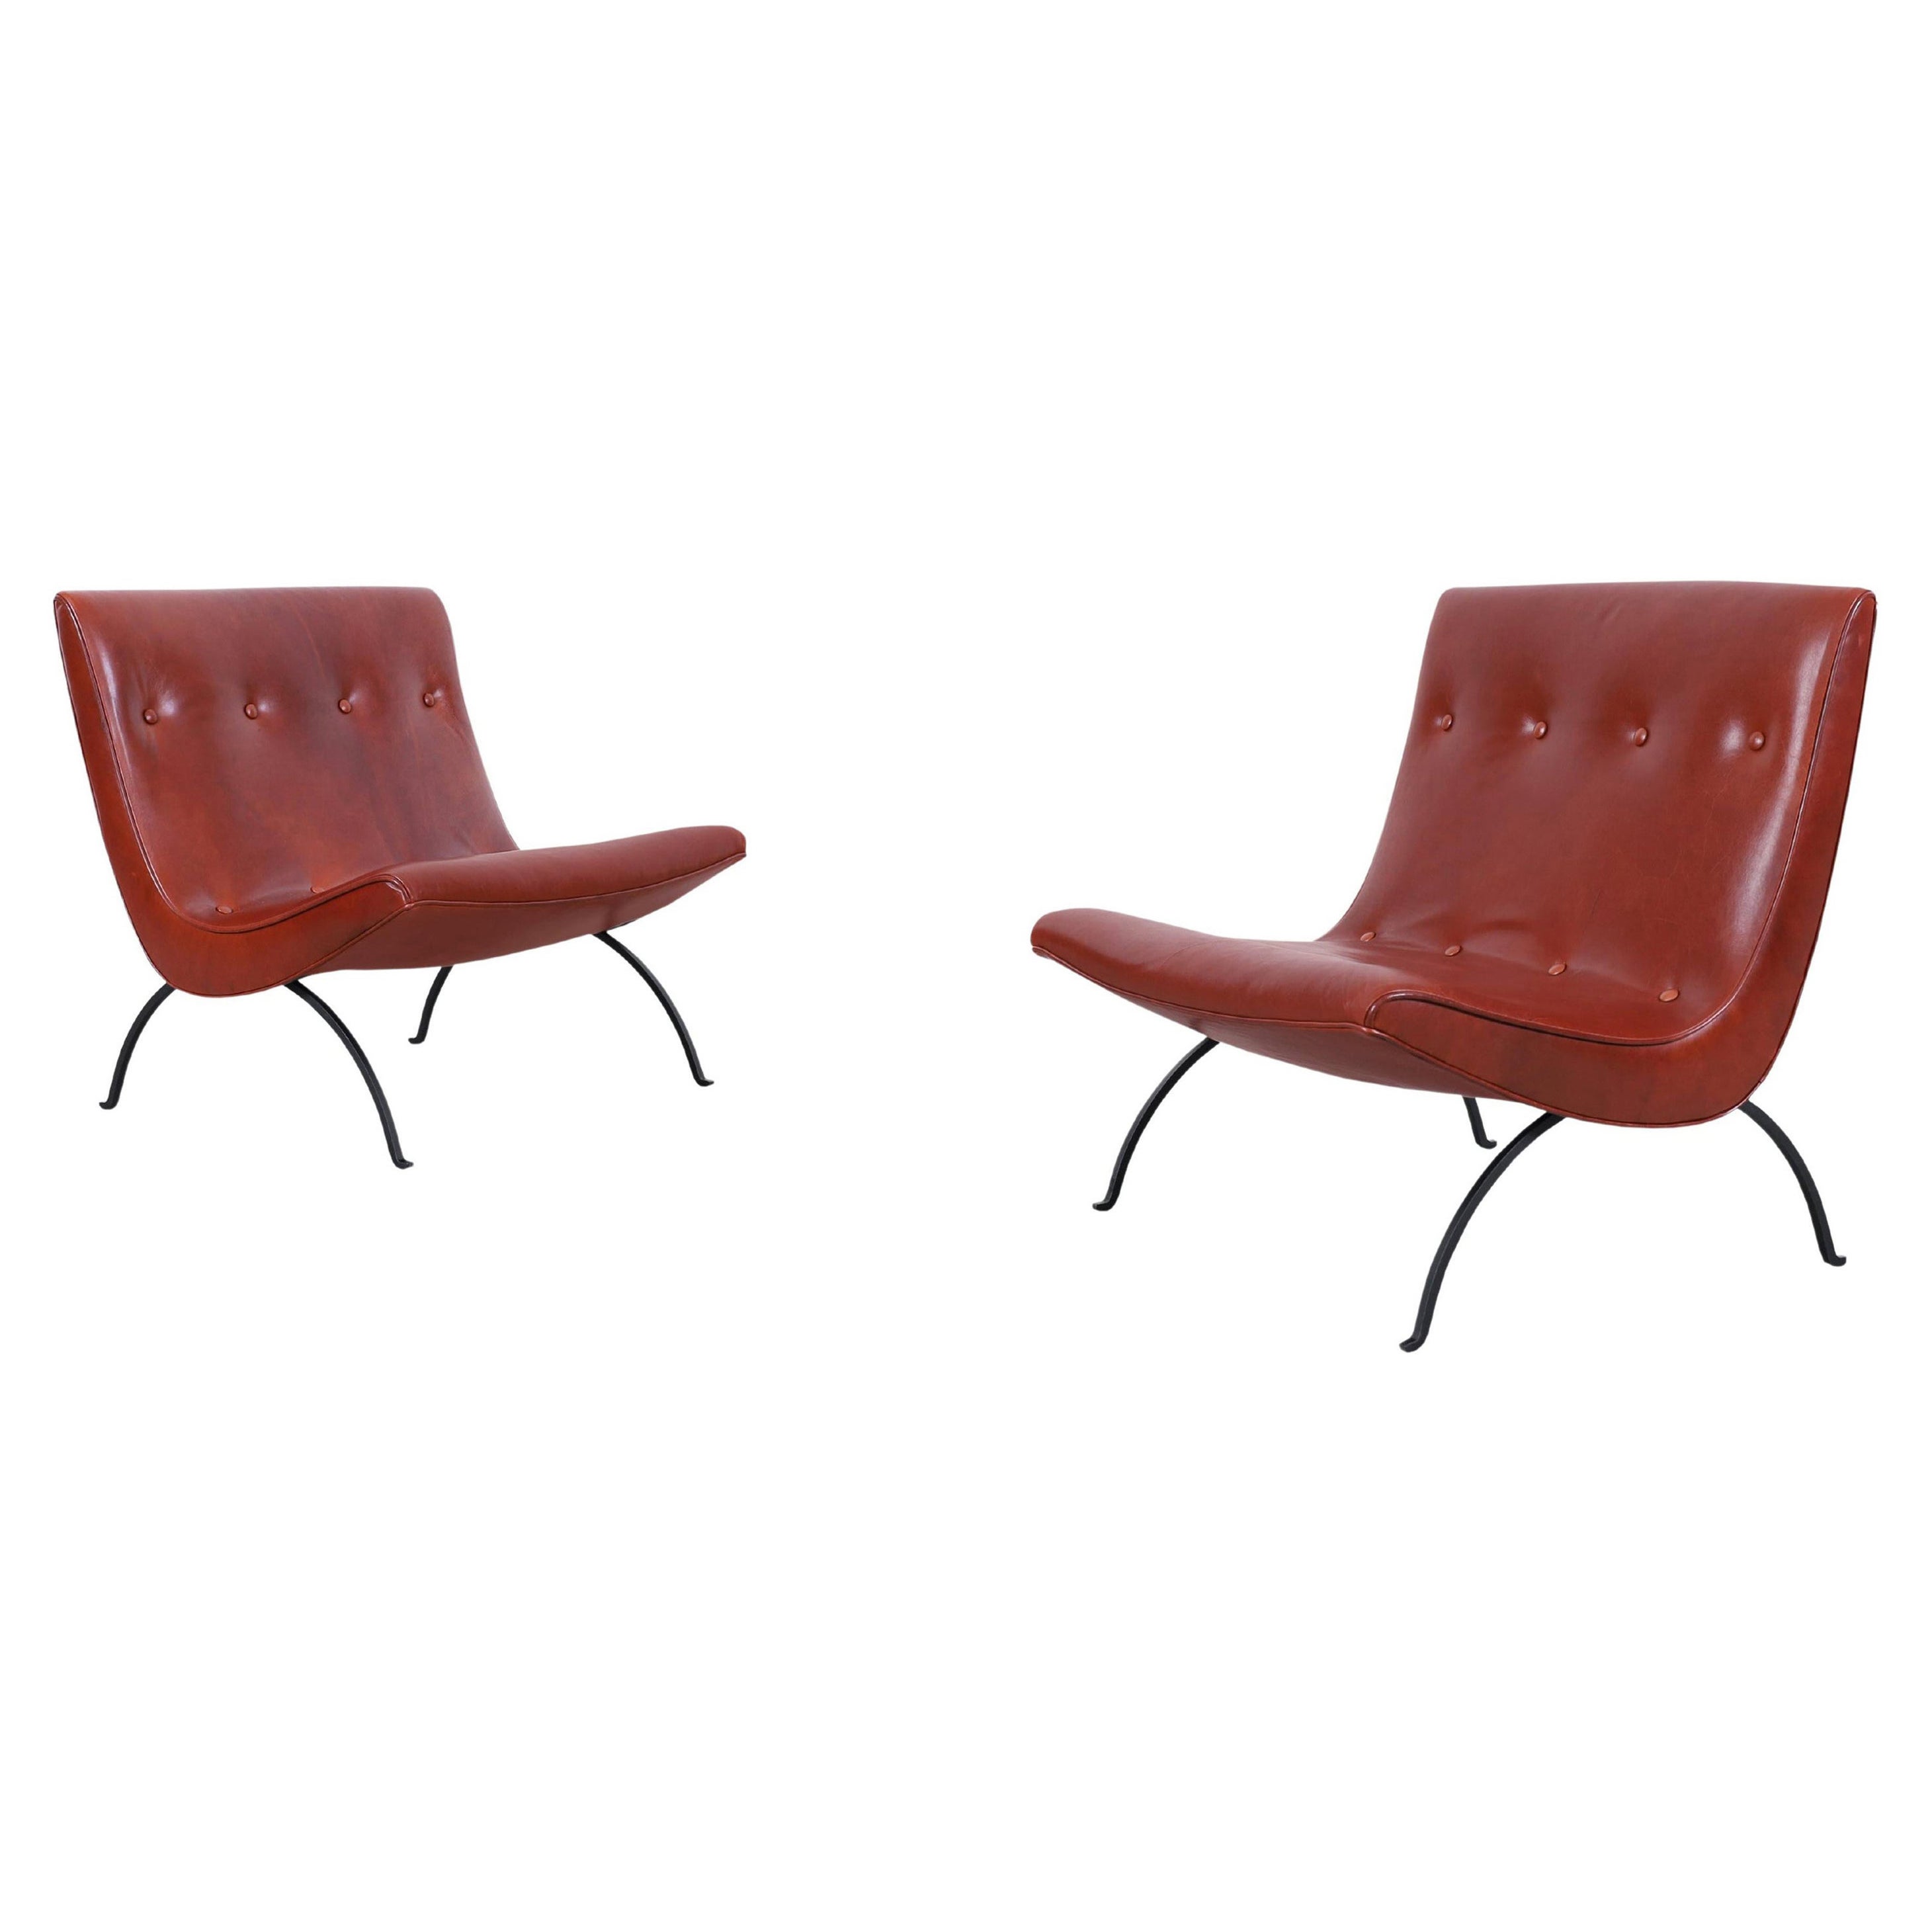 Early Leather and Iron "Scoop" Lounge Chairs by Milo Baughman For Sale